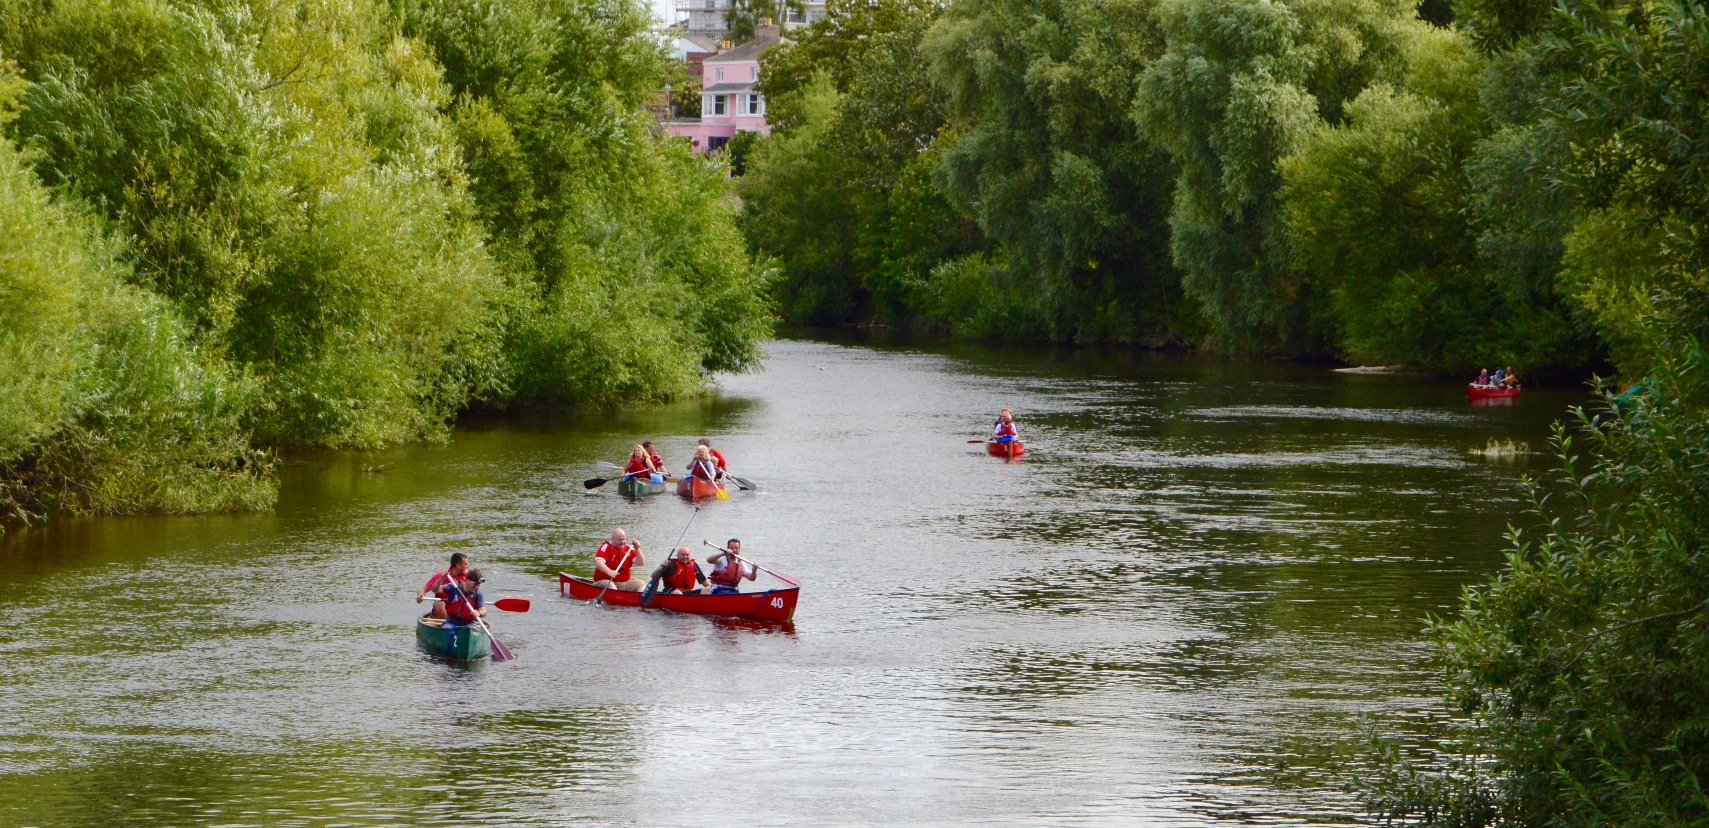 Canoeing on the Wye © Ross-on-Wye Town Council